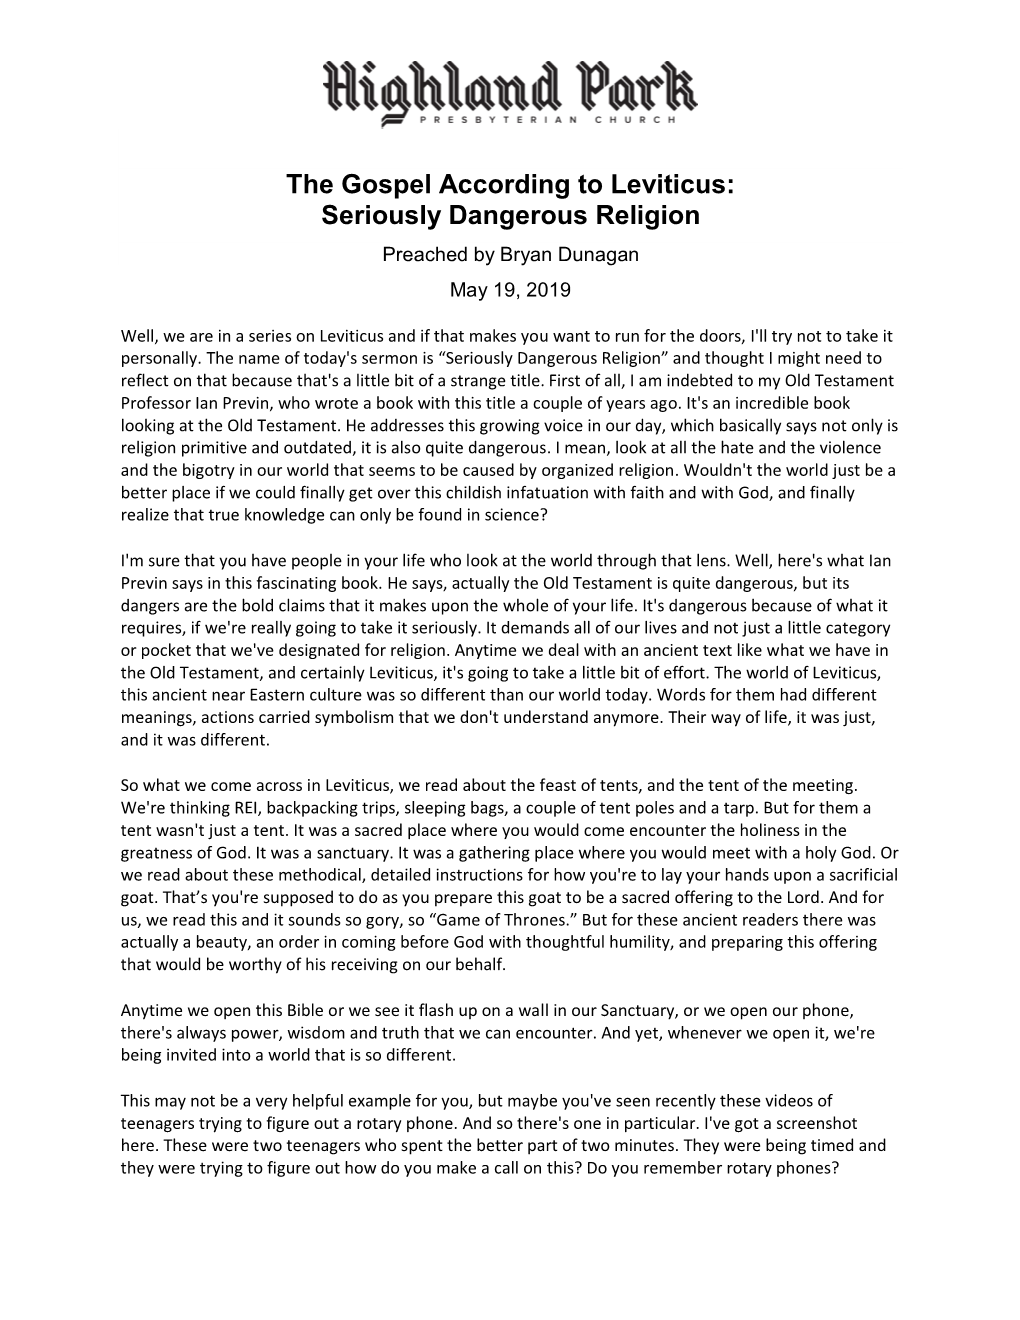 The Gospel According to Leviticus: Seriously Dangerous Religion Preached by Bryan Dunagan May 19, 2019